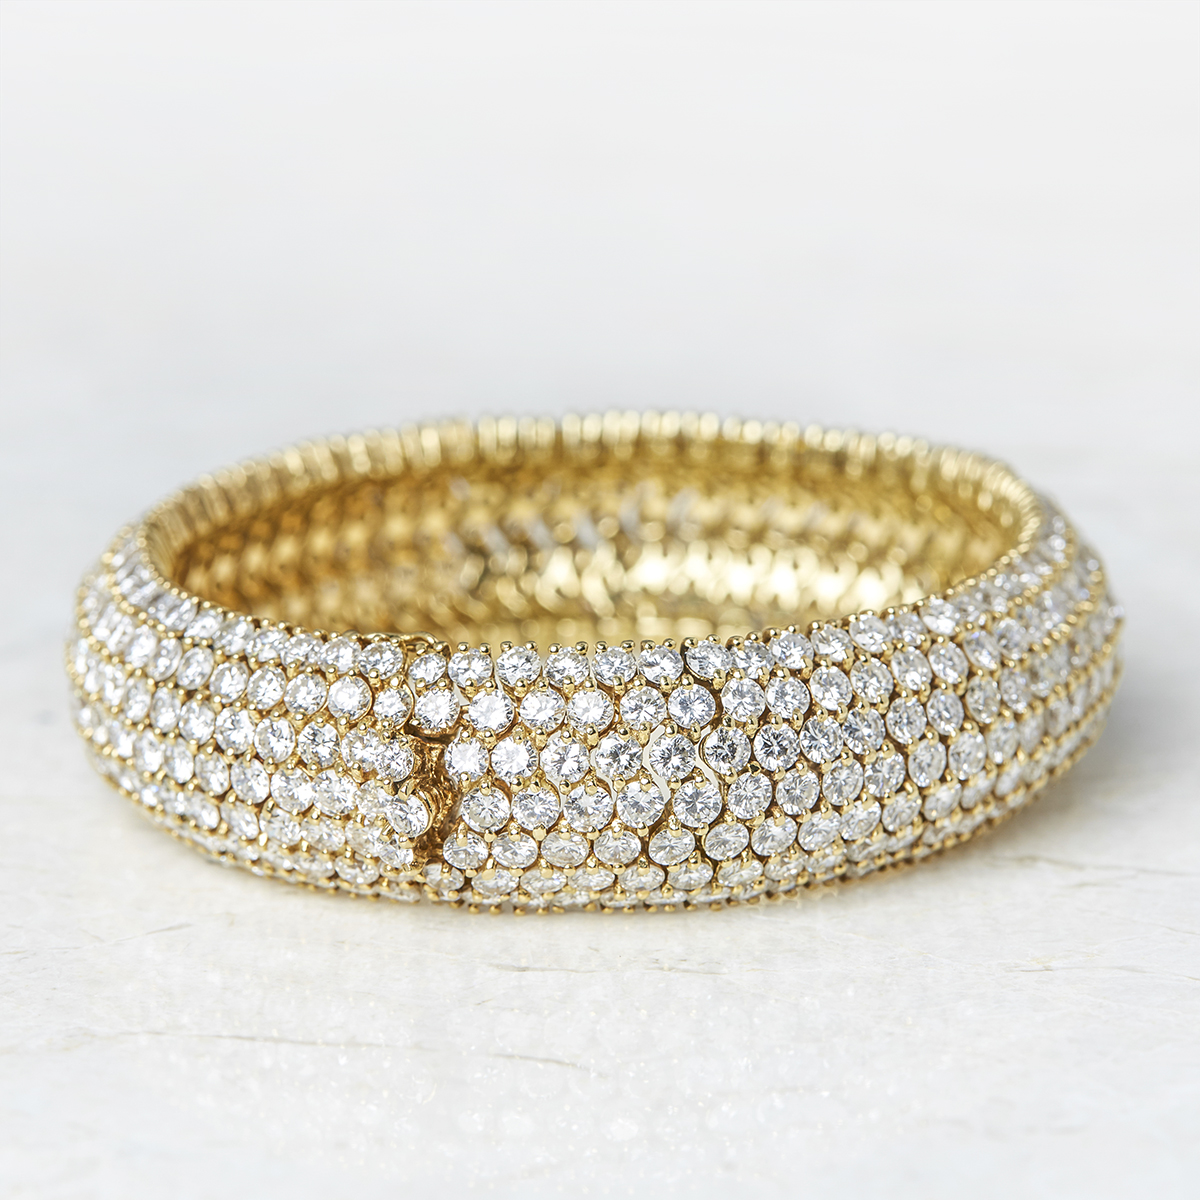 Unbranded, 18k Yellow Gold Round Brilliant Cut 49.00ct Diamond Cluster Bracelet - Image 3 of 8